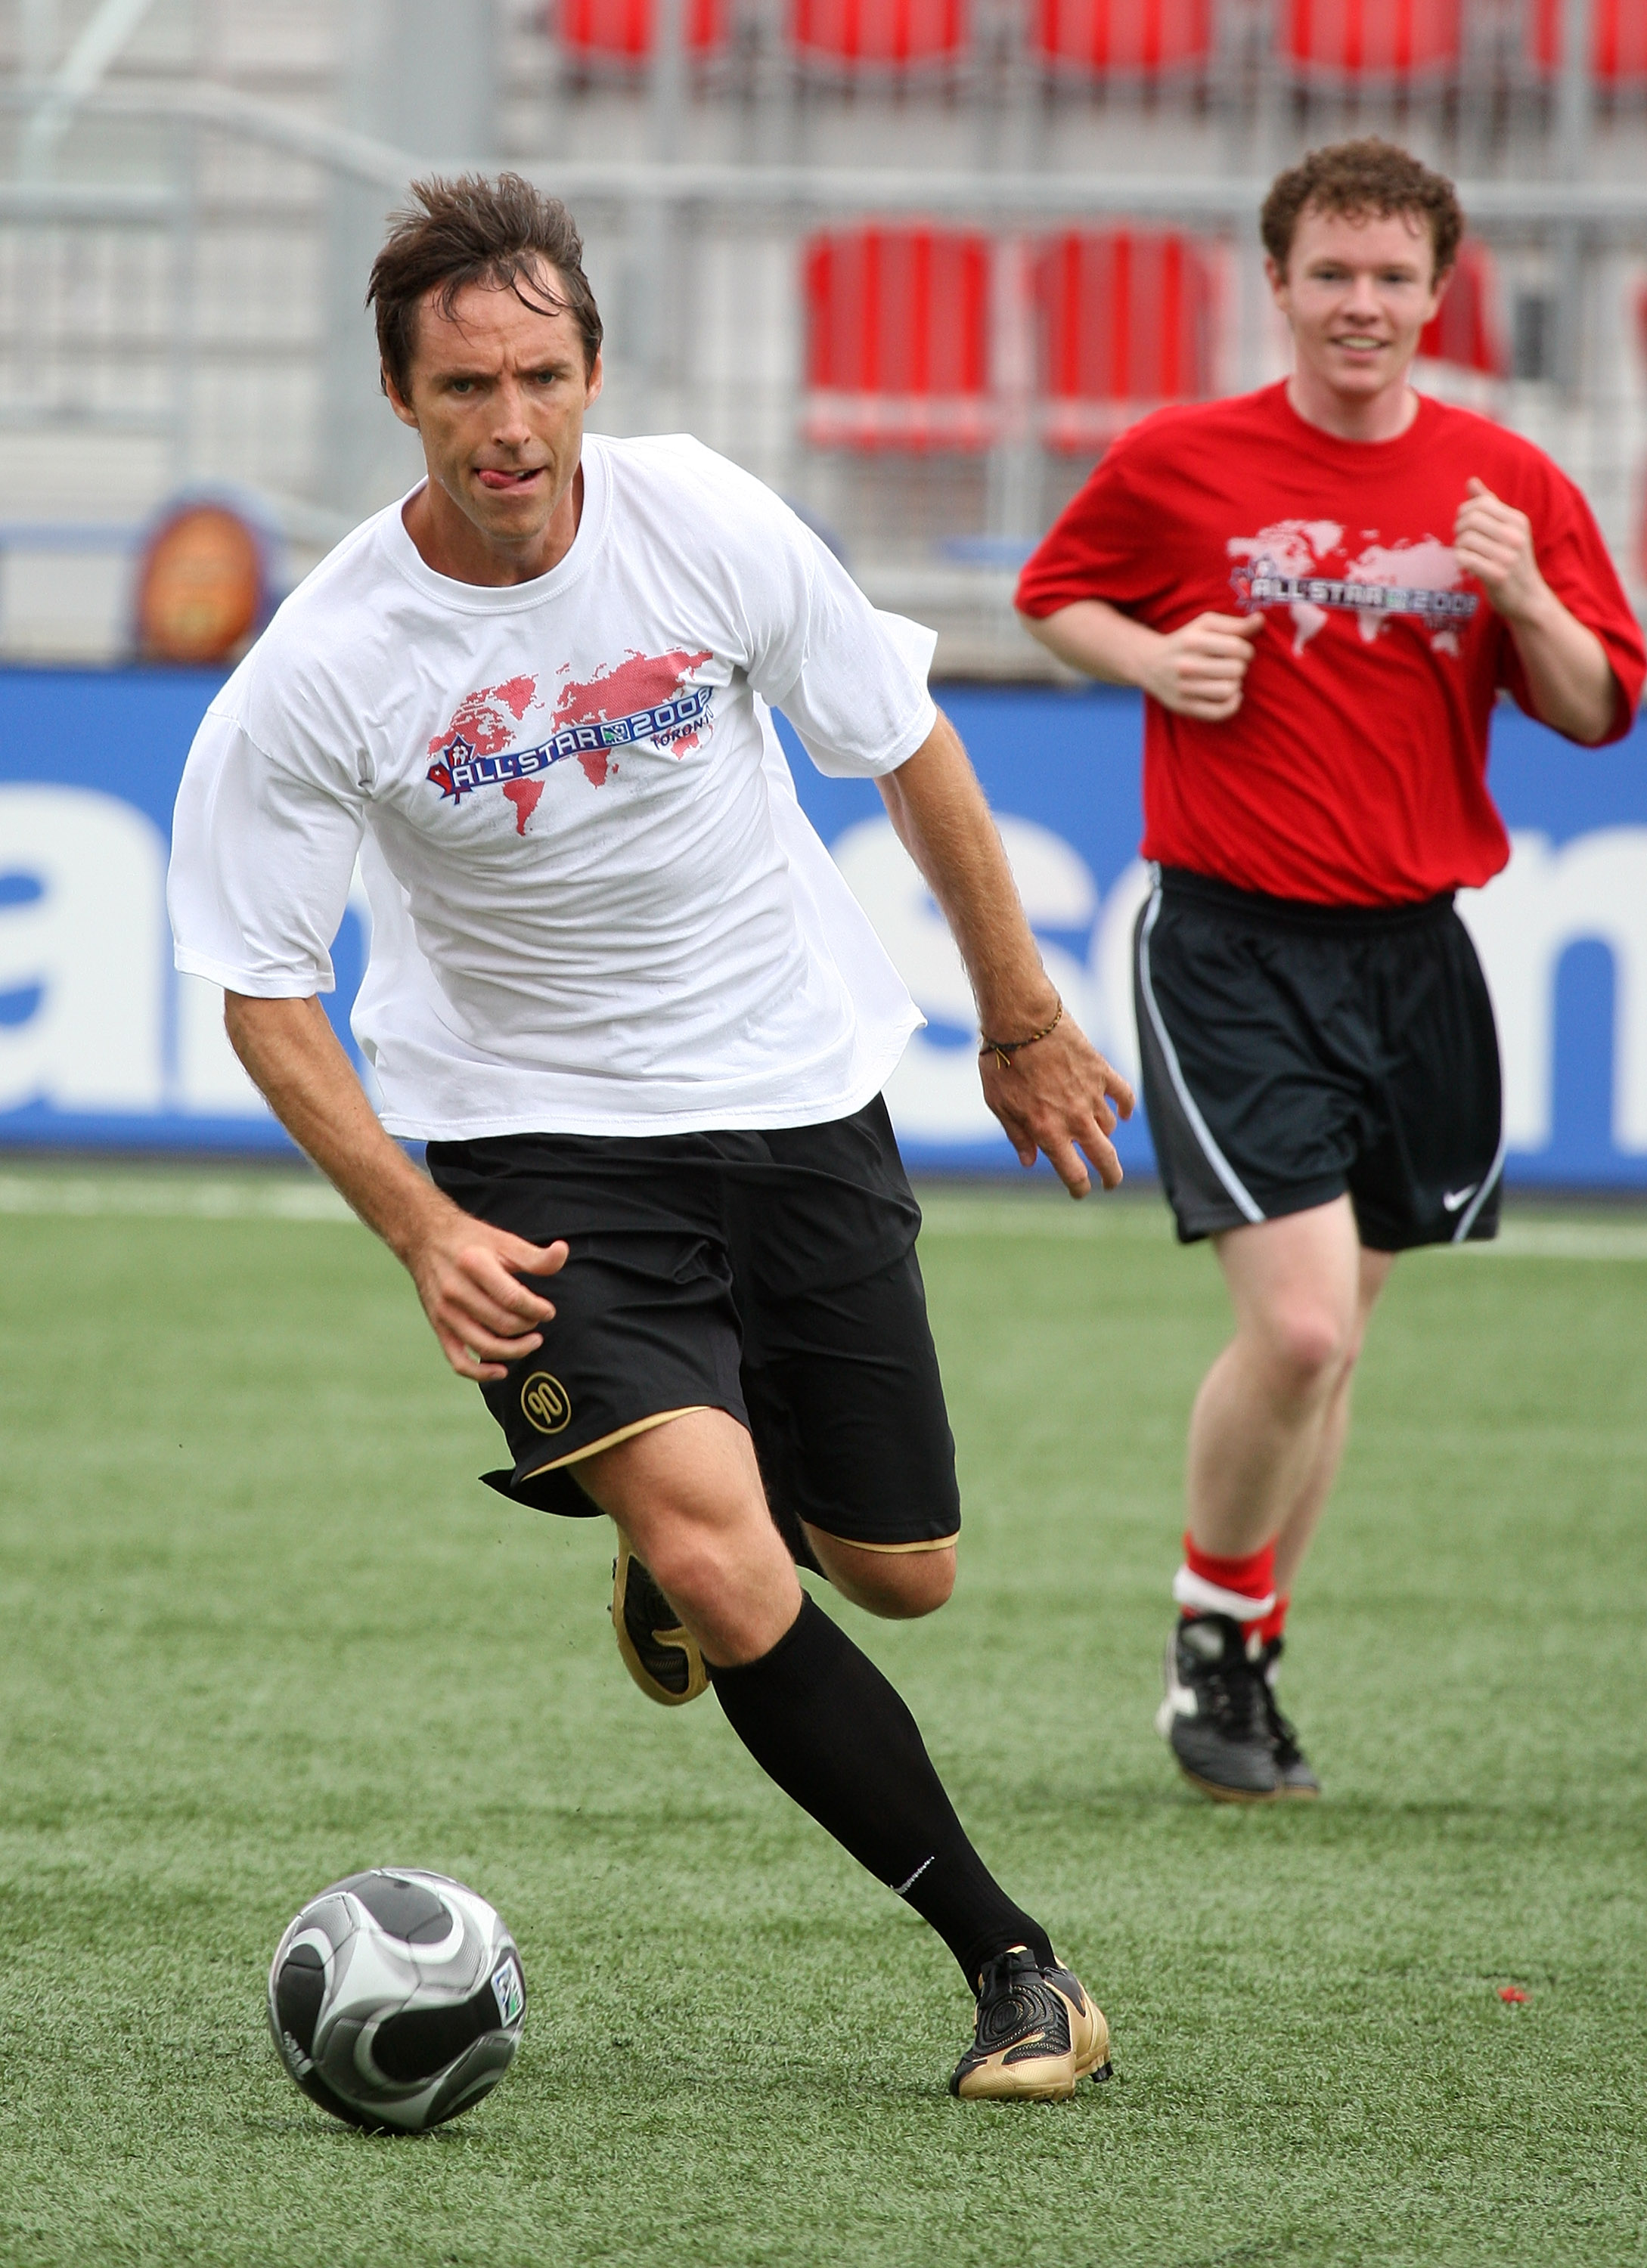 TORONTO - JULY 24:  NBA basketball player Steve Nash plays soccer with members of the media during the MLS All Star Media Game at BMO Field on July 24, 2008 in Toronto, Canada.  (Photo by Claus Andersen/Getty Images)